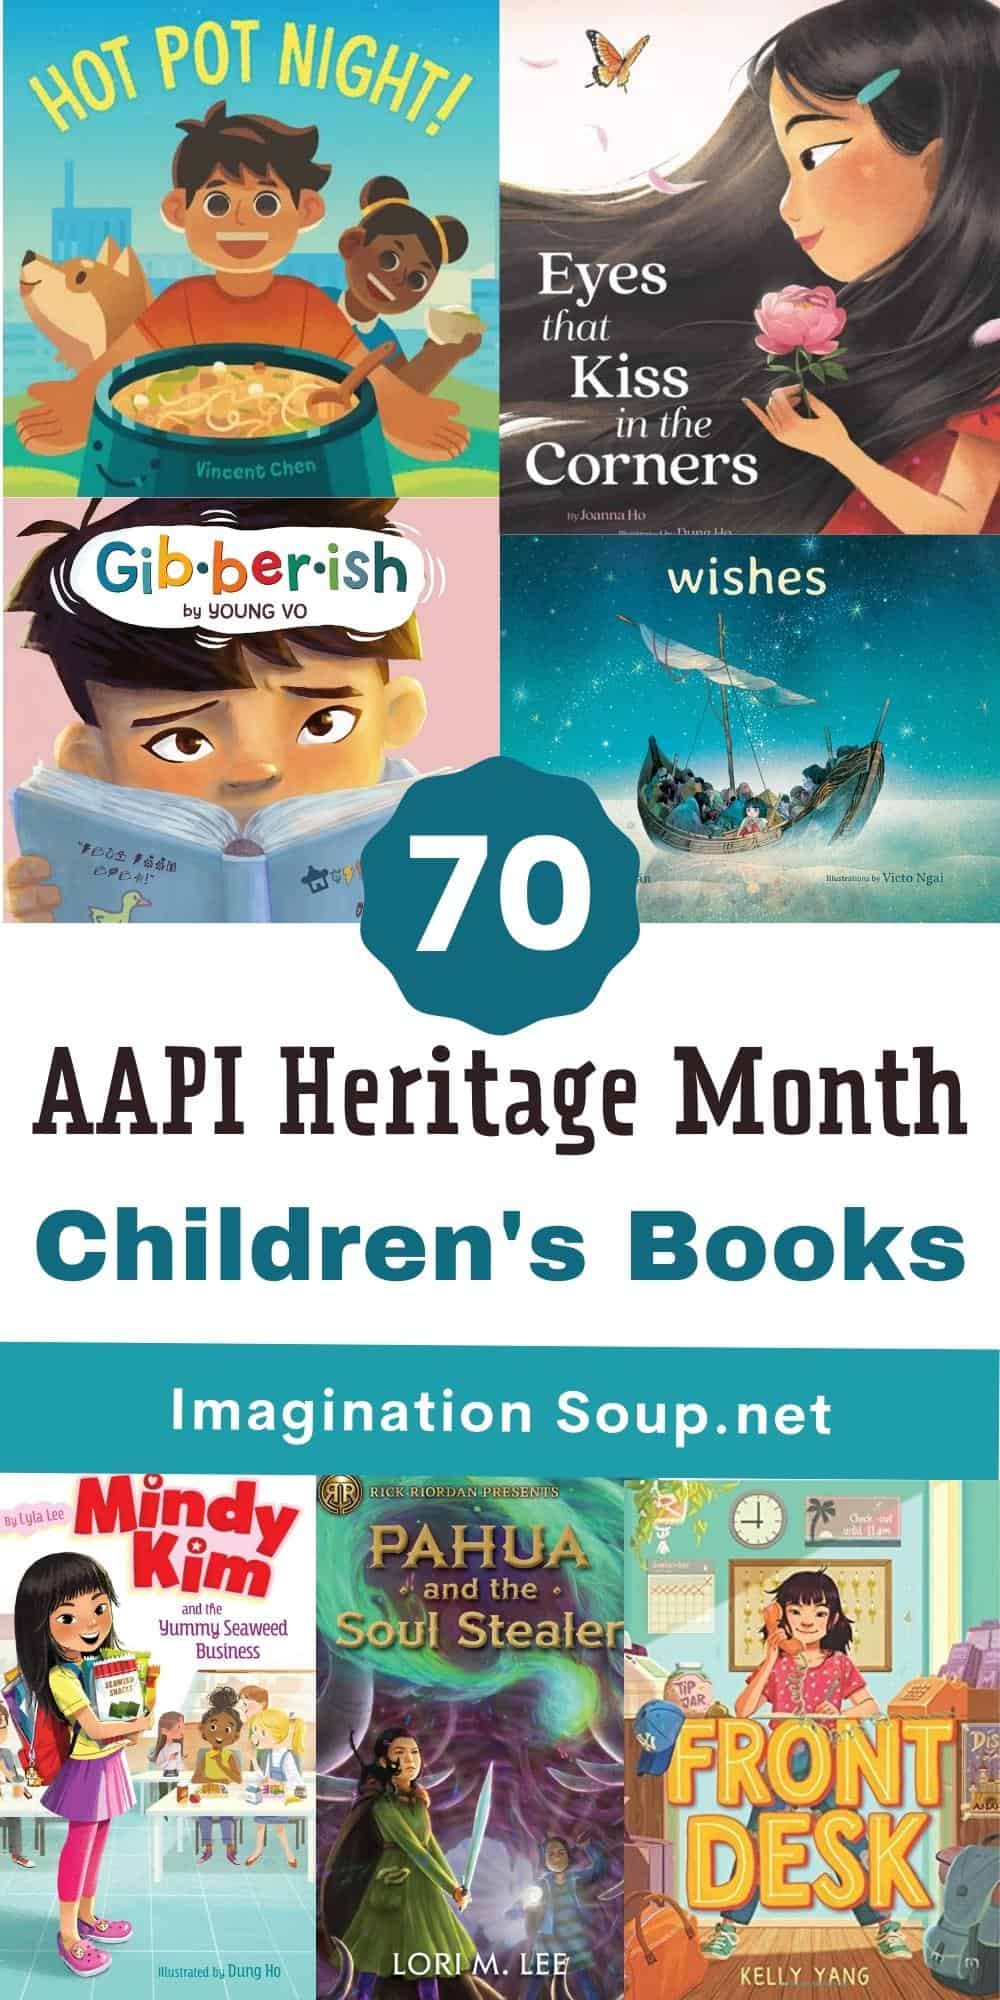 childrens book for AAPI heritage months